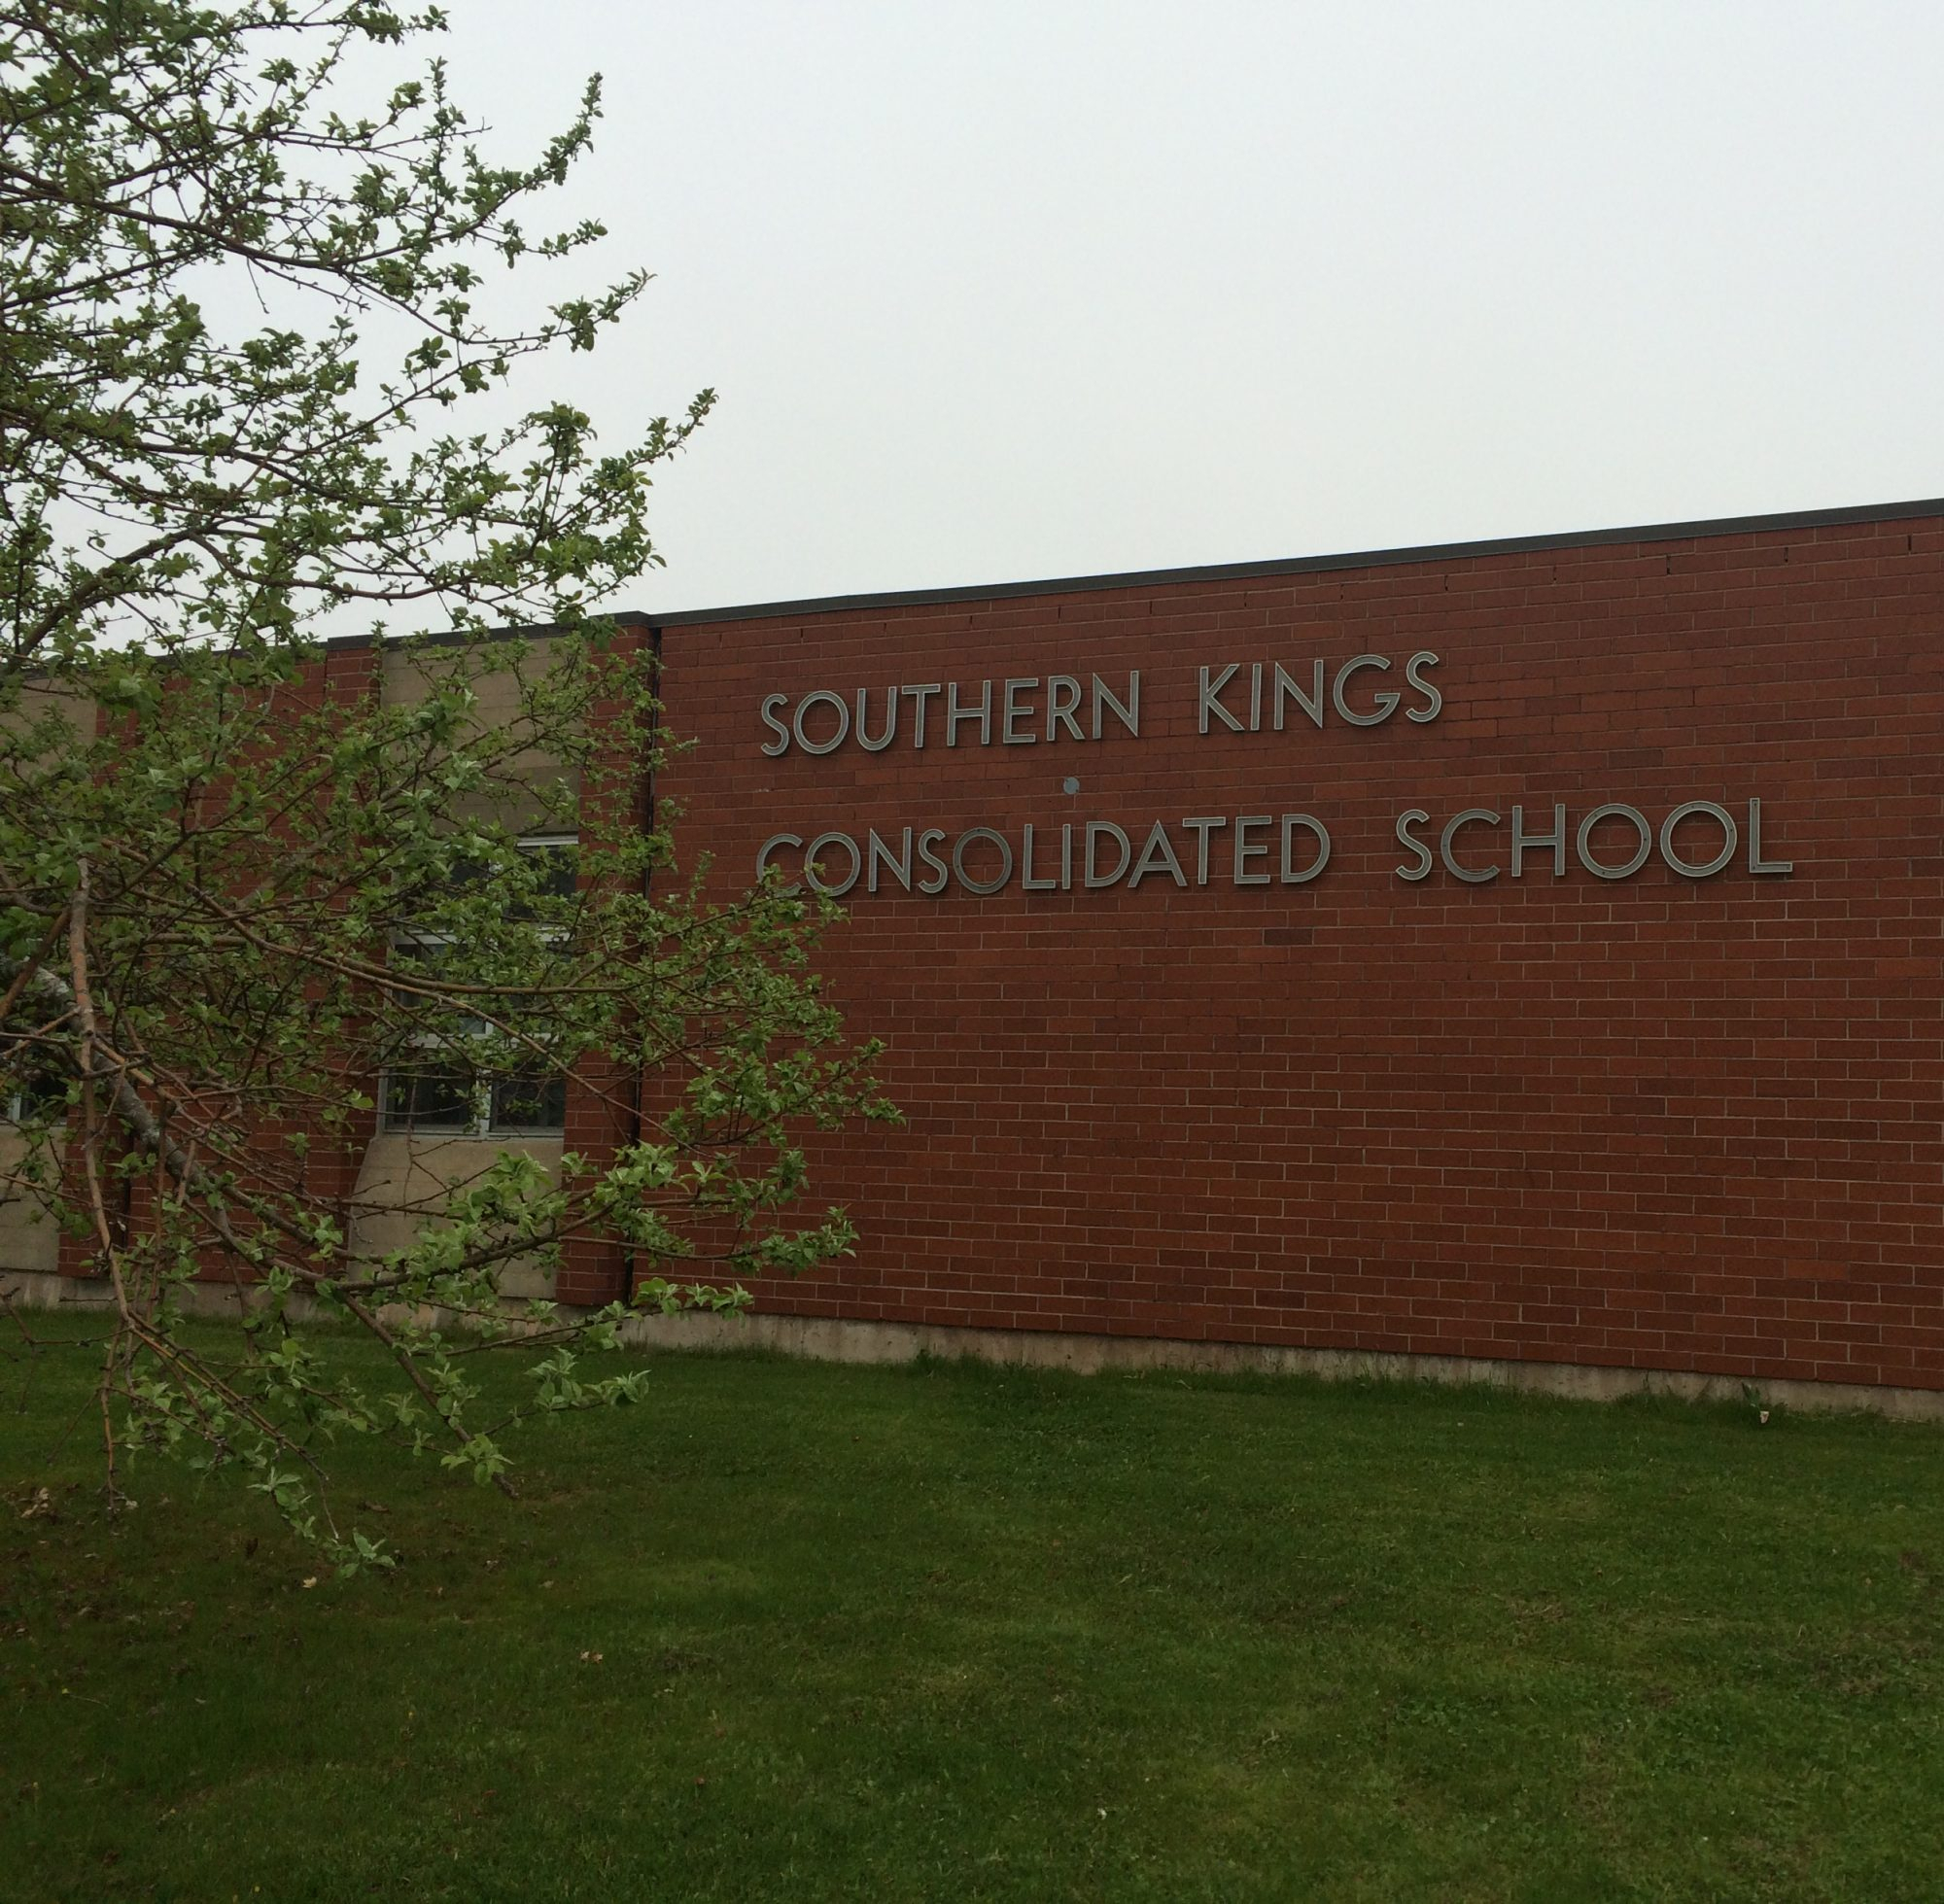 20192020 School Calendar | Southern Kings Consolidated School intended for Pei School Calendar 2020